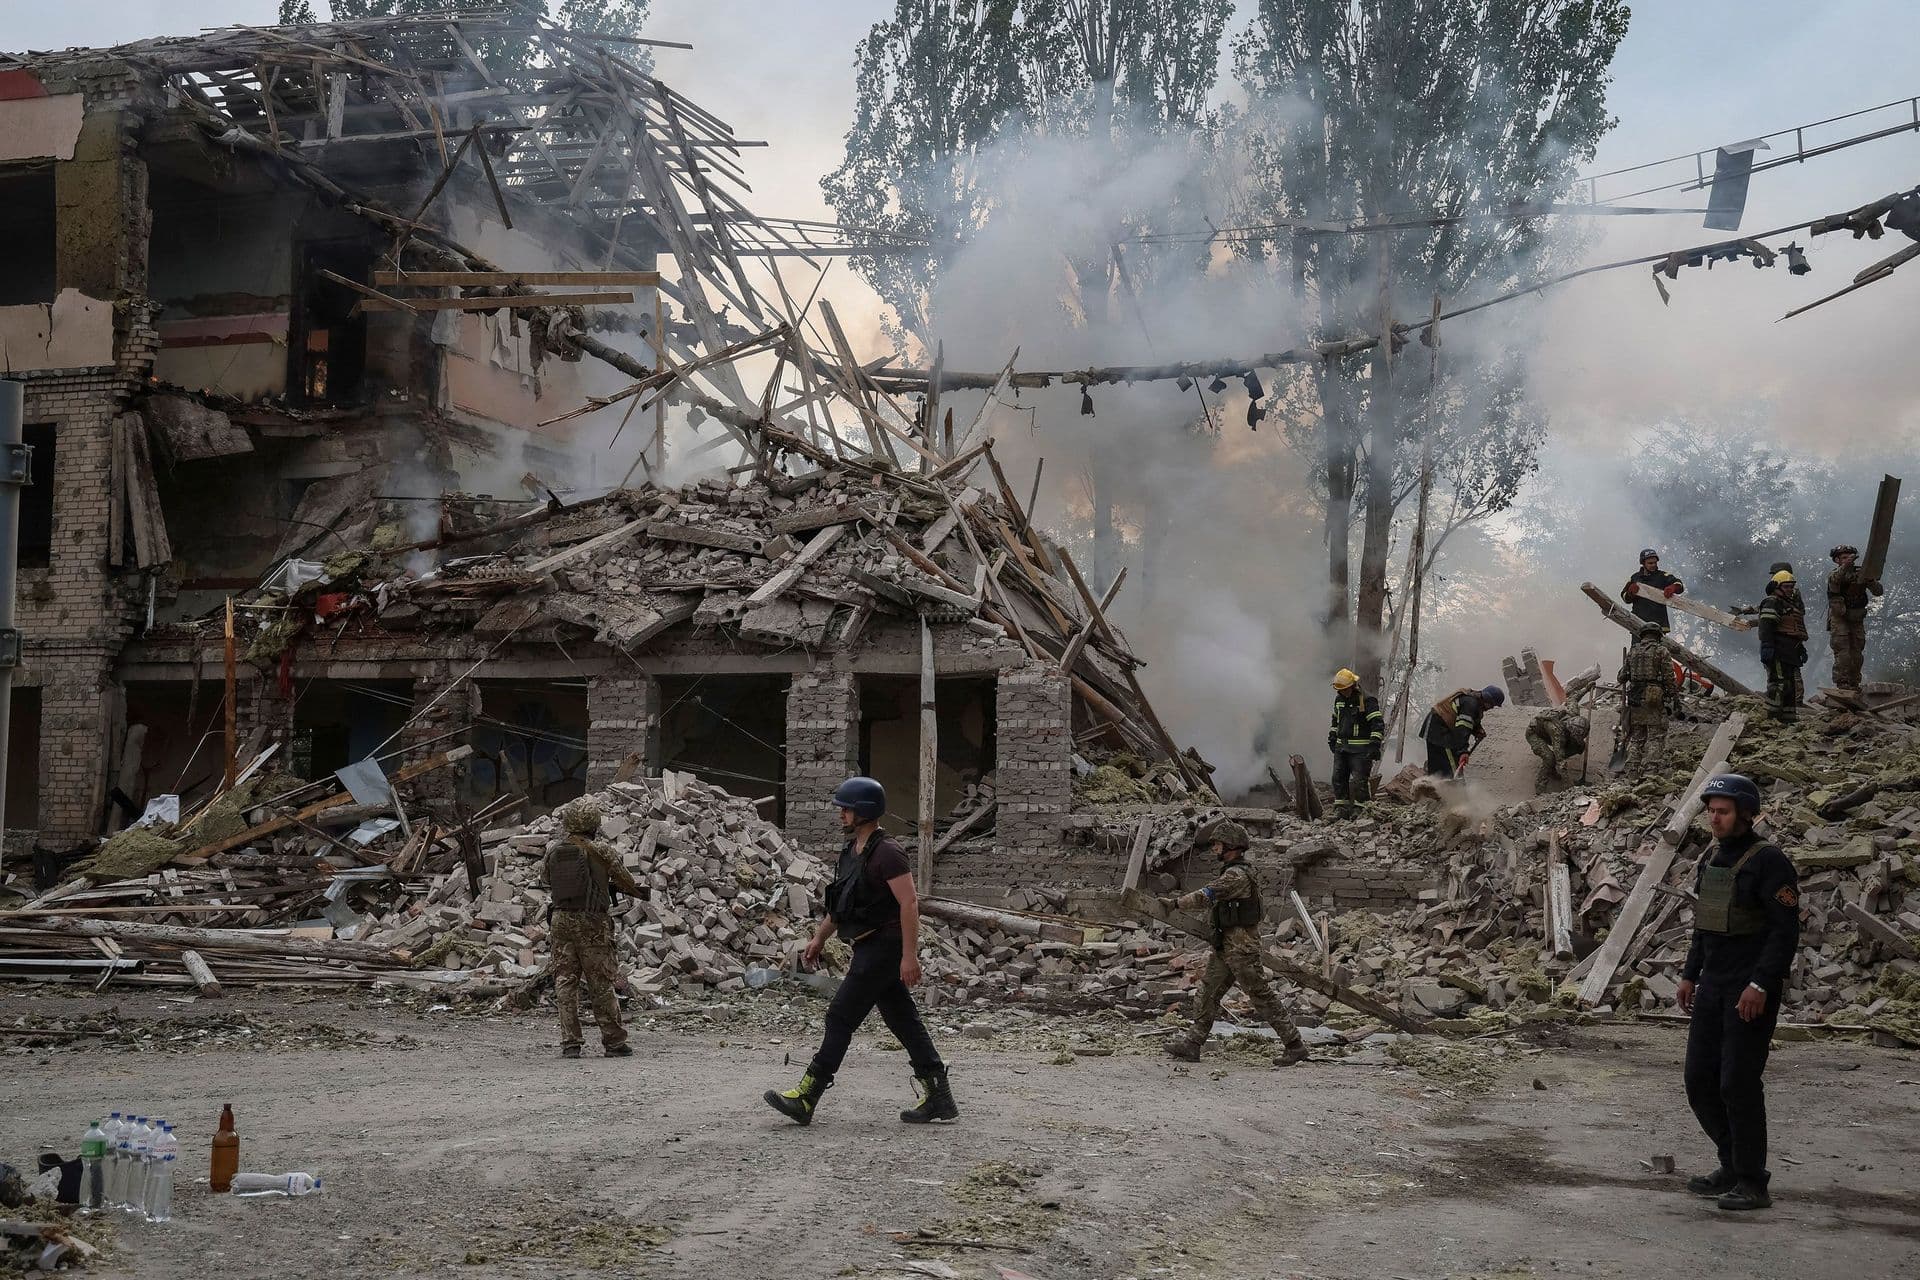 Rescuers and servicemen work at a damaged school building in Kramatorsk